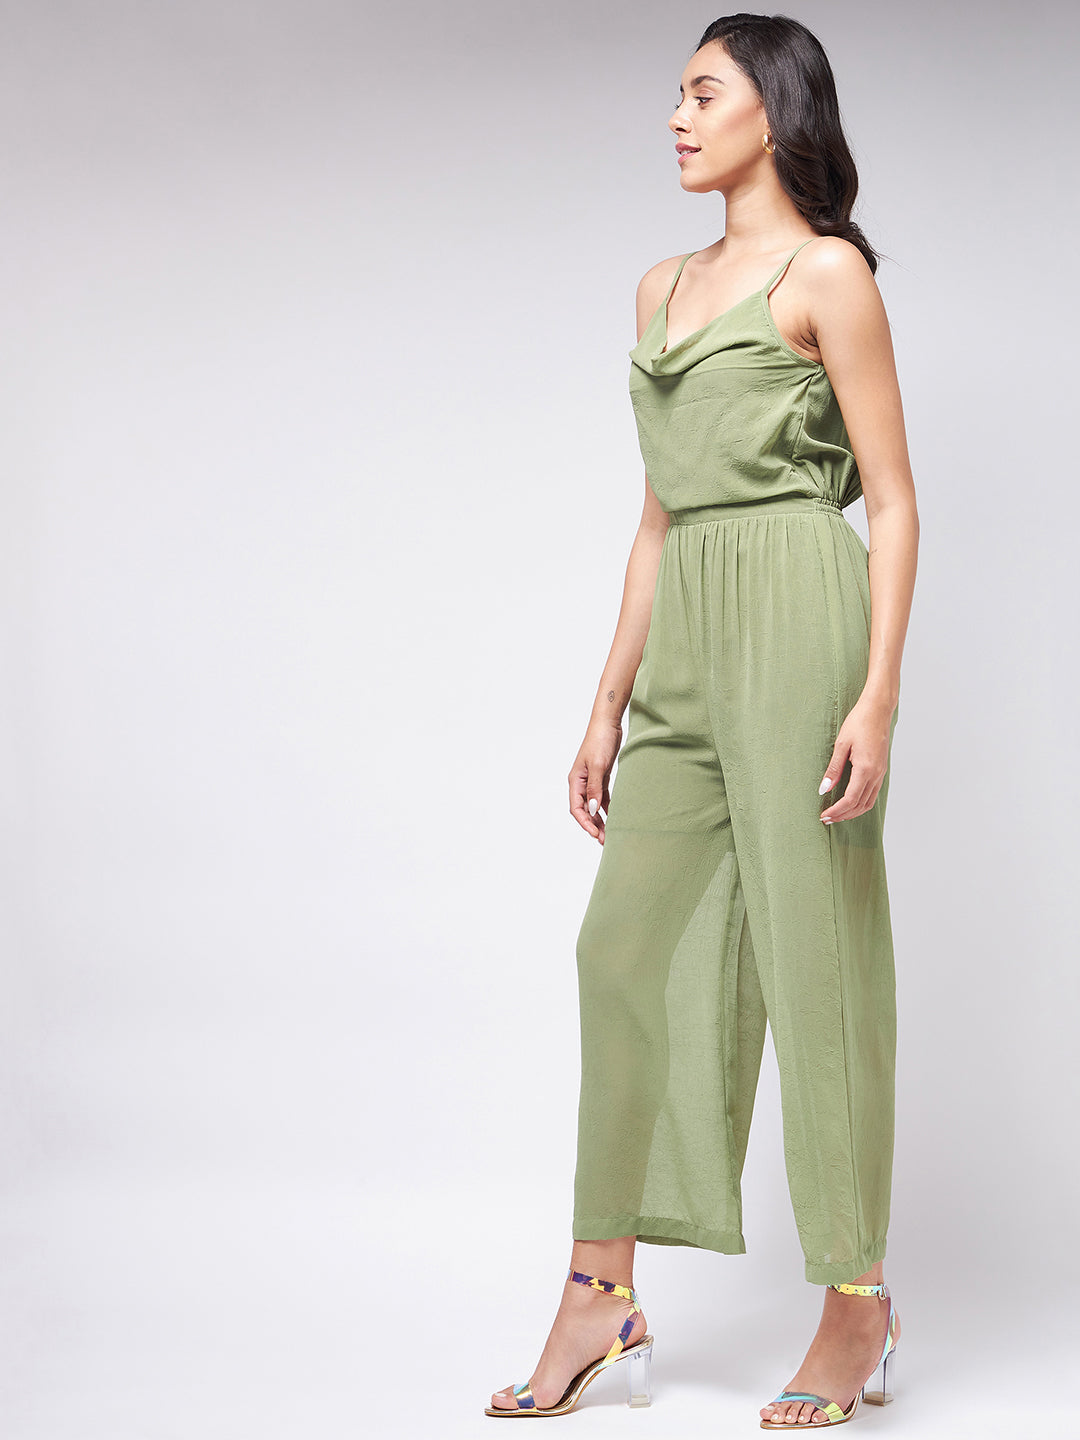 Flaunt Yourself With Solid Cowl Neckline Jumpsuit